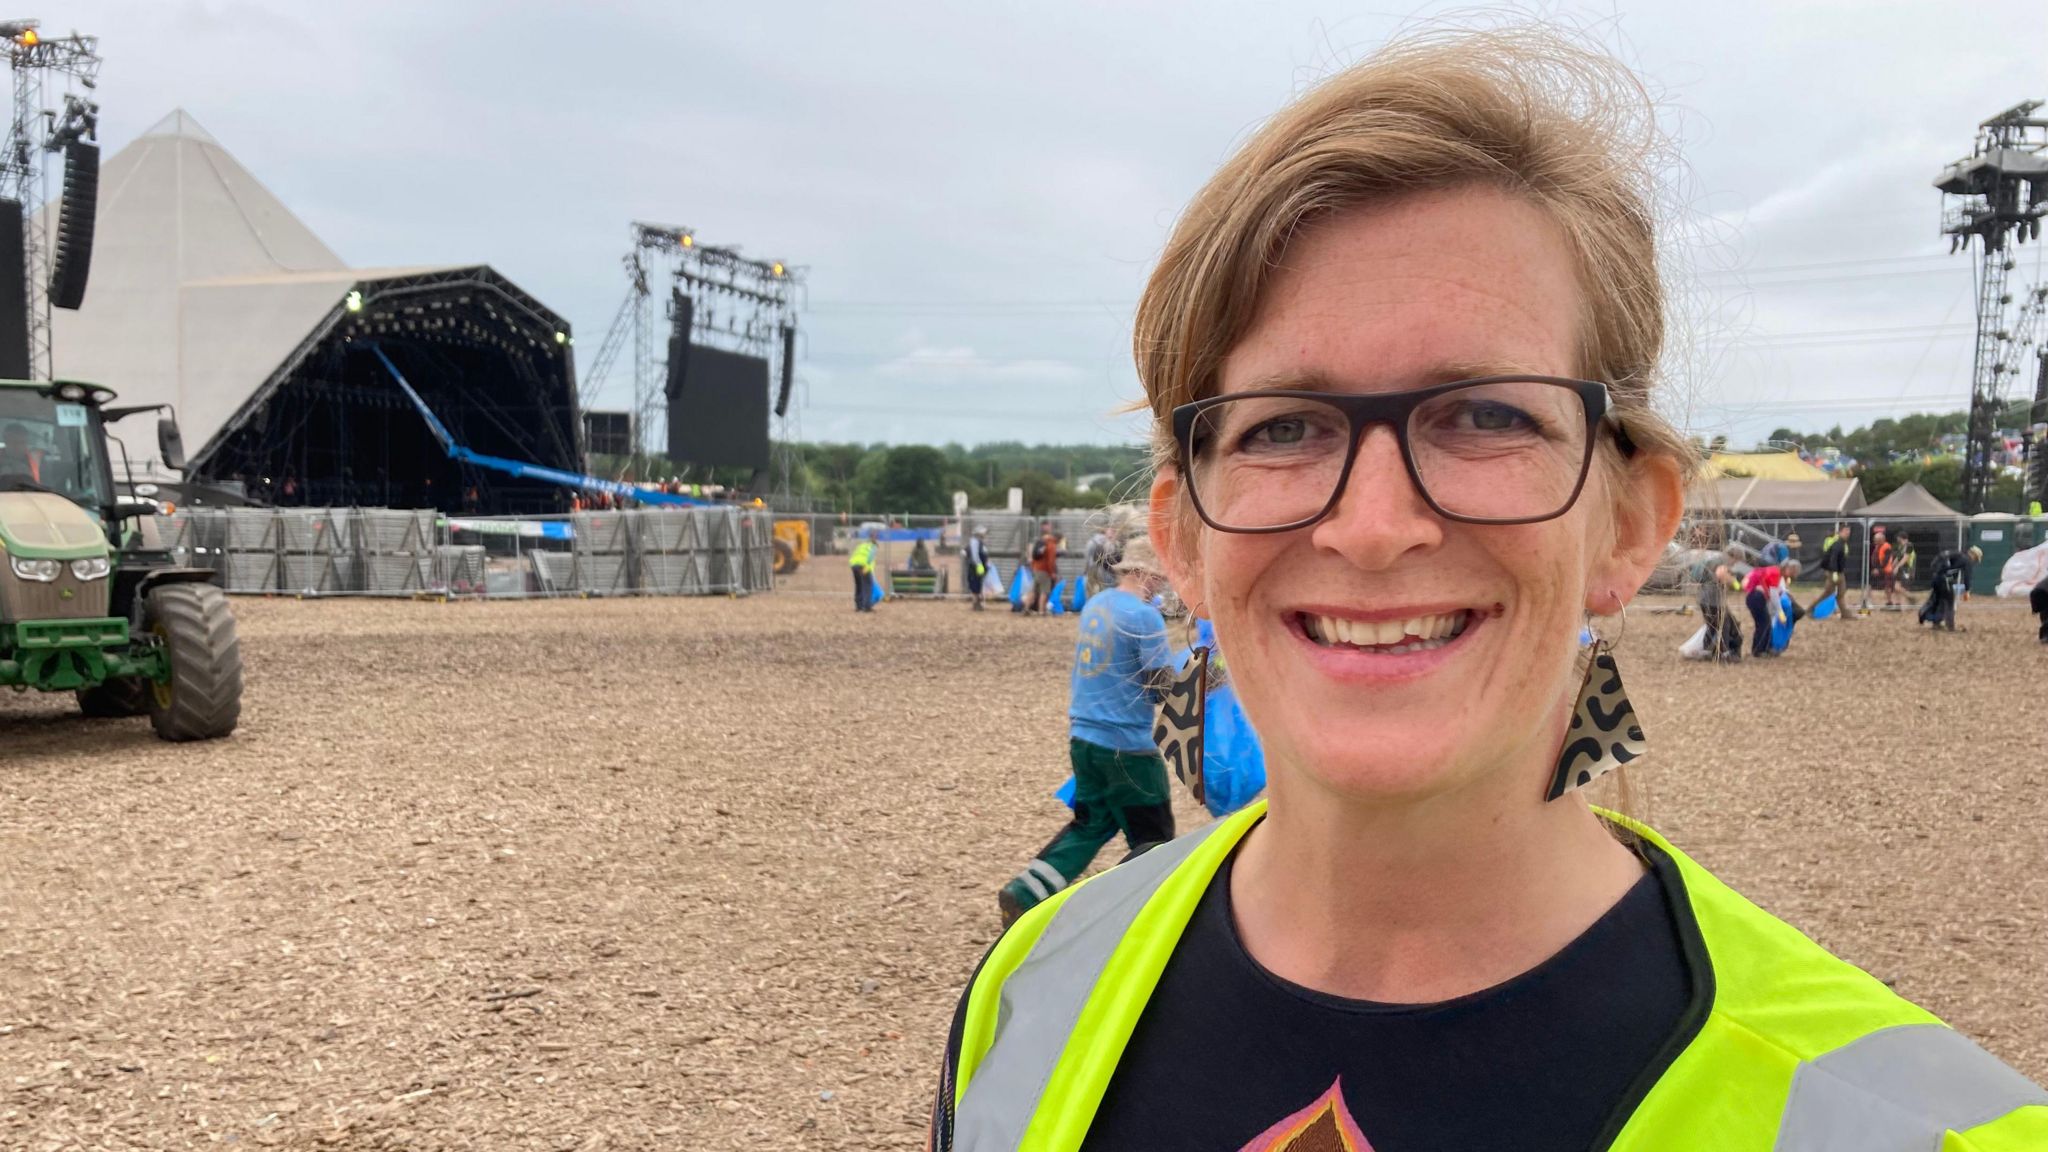 Woman in high-viz stood in front of the Pyramid Stage